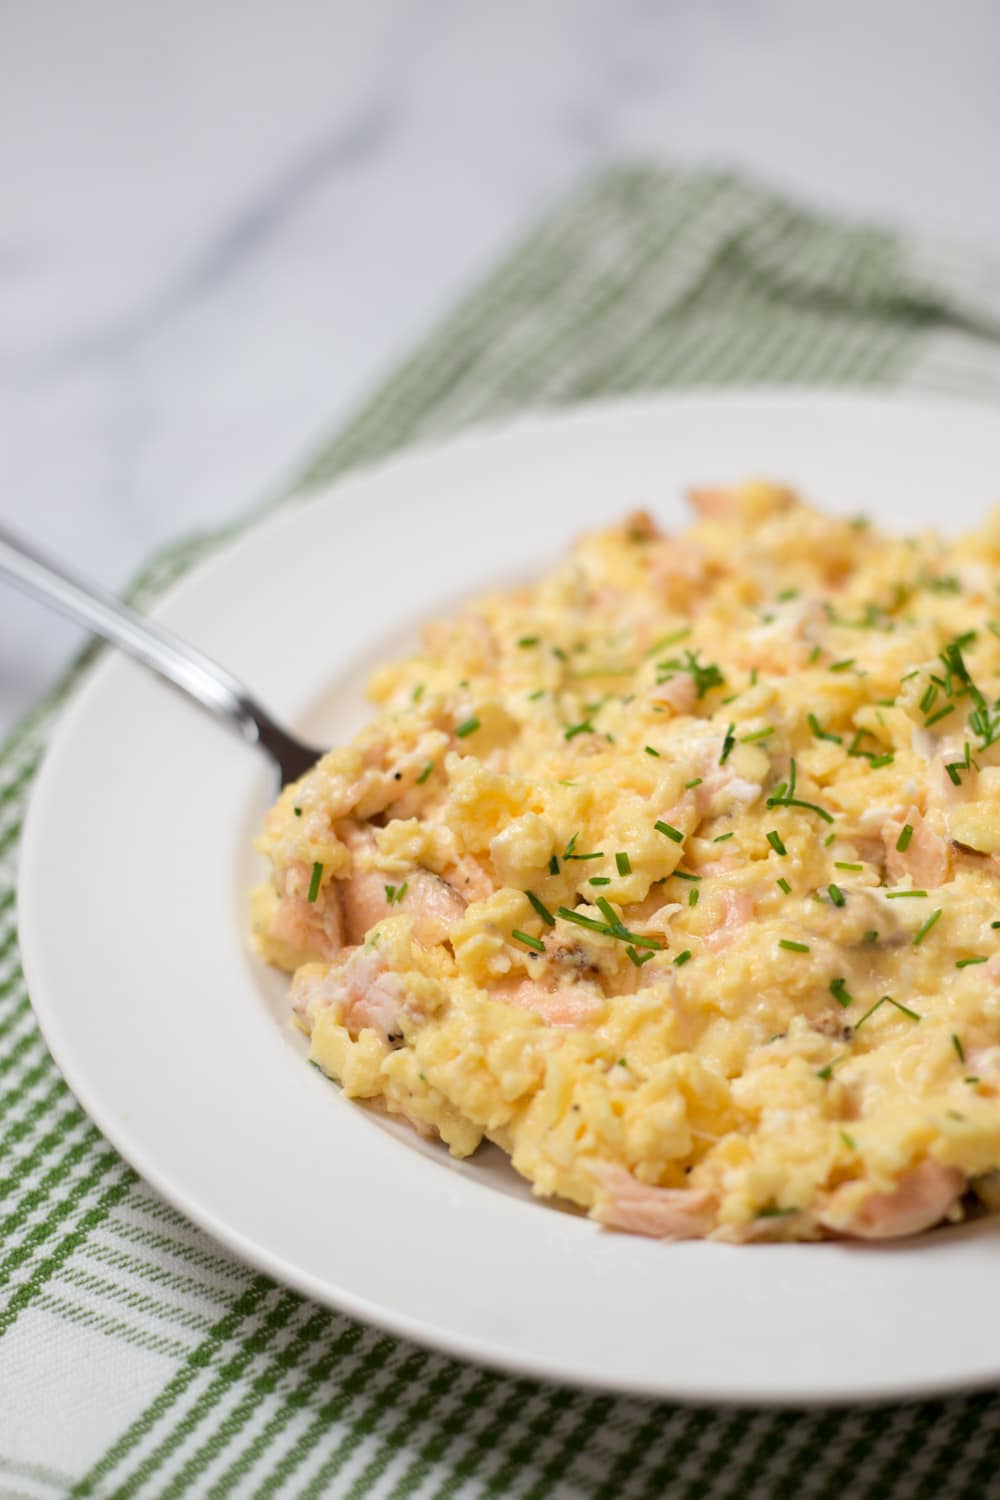 Soft Scrambled Eggs with Salmon and Cream Cheese - Artzy Foodie